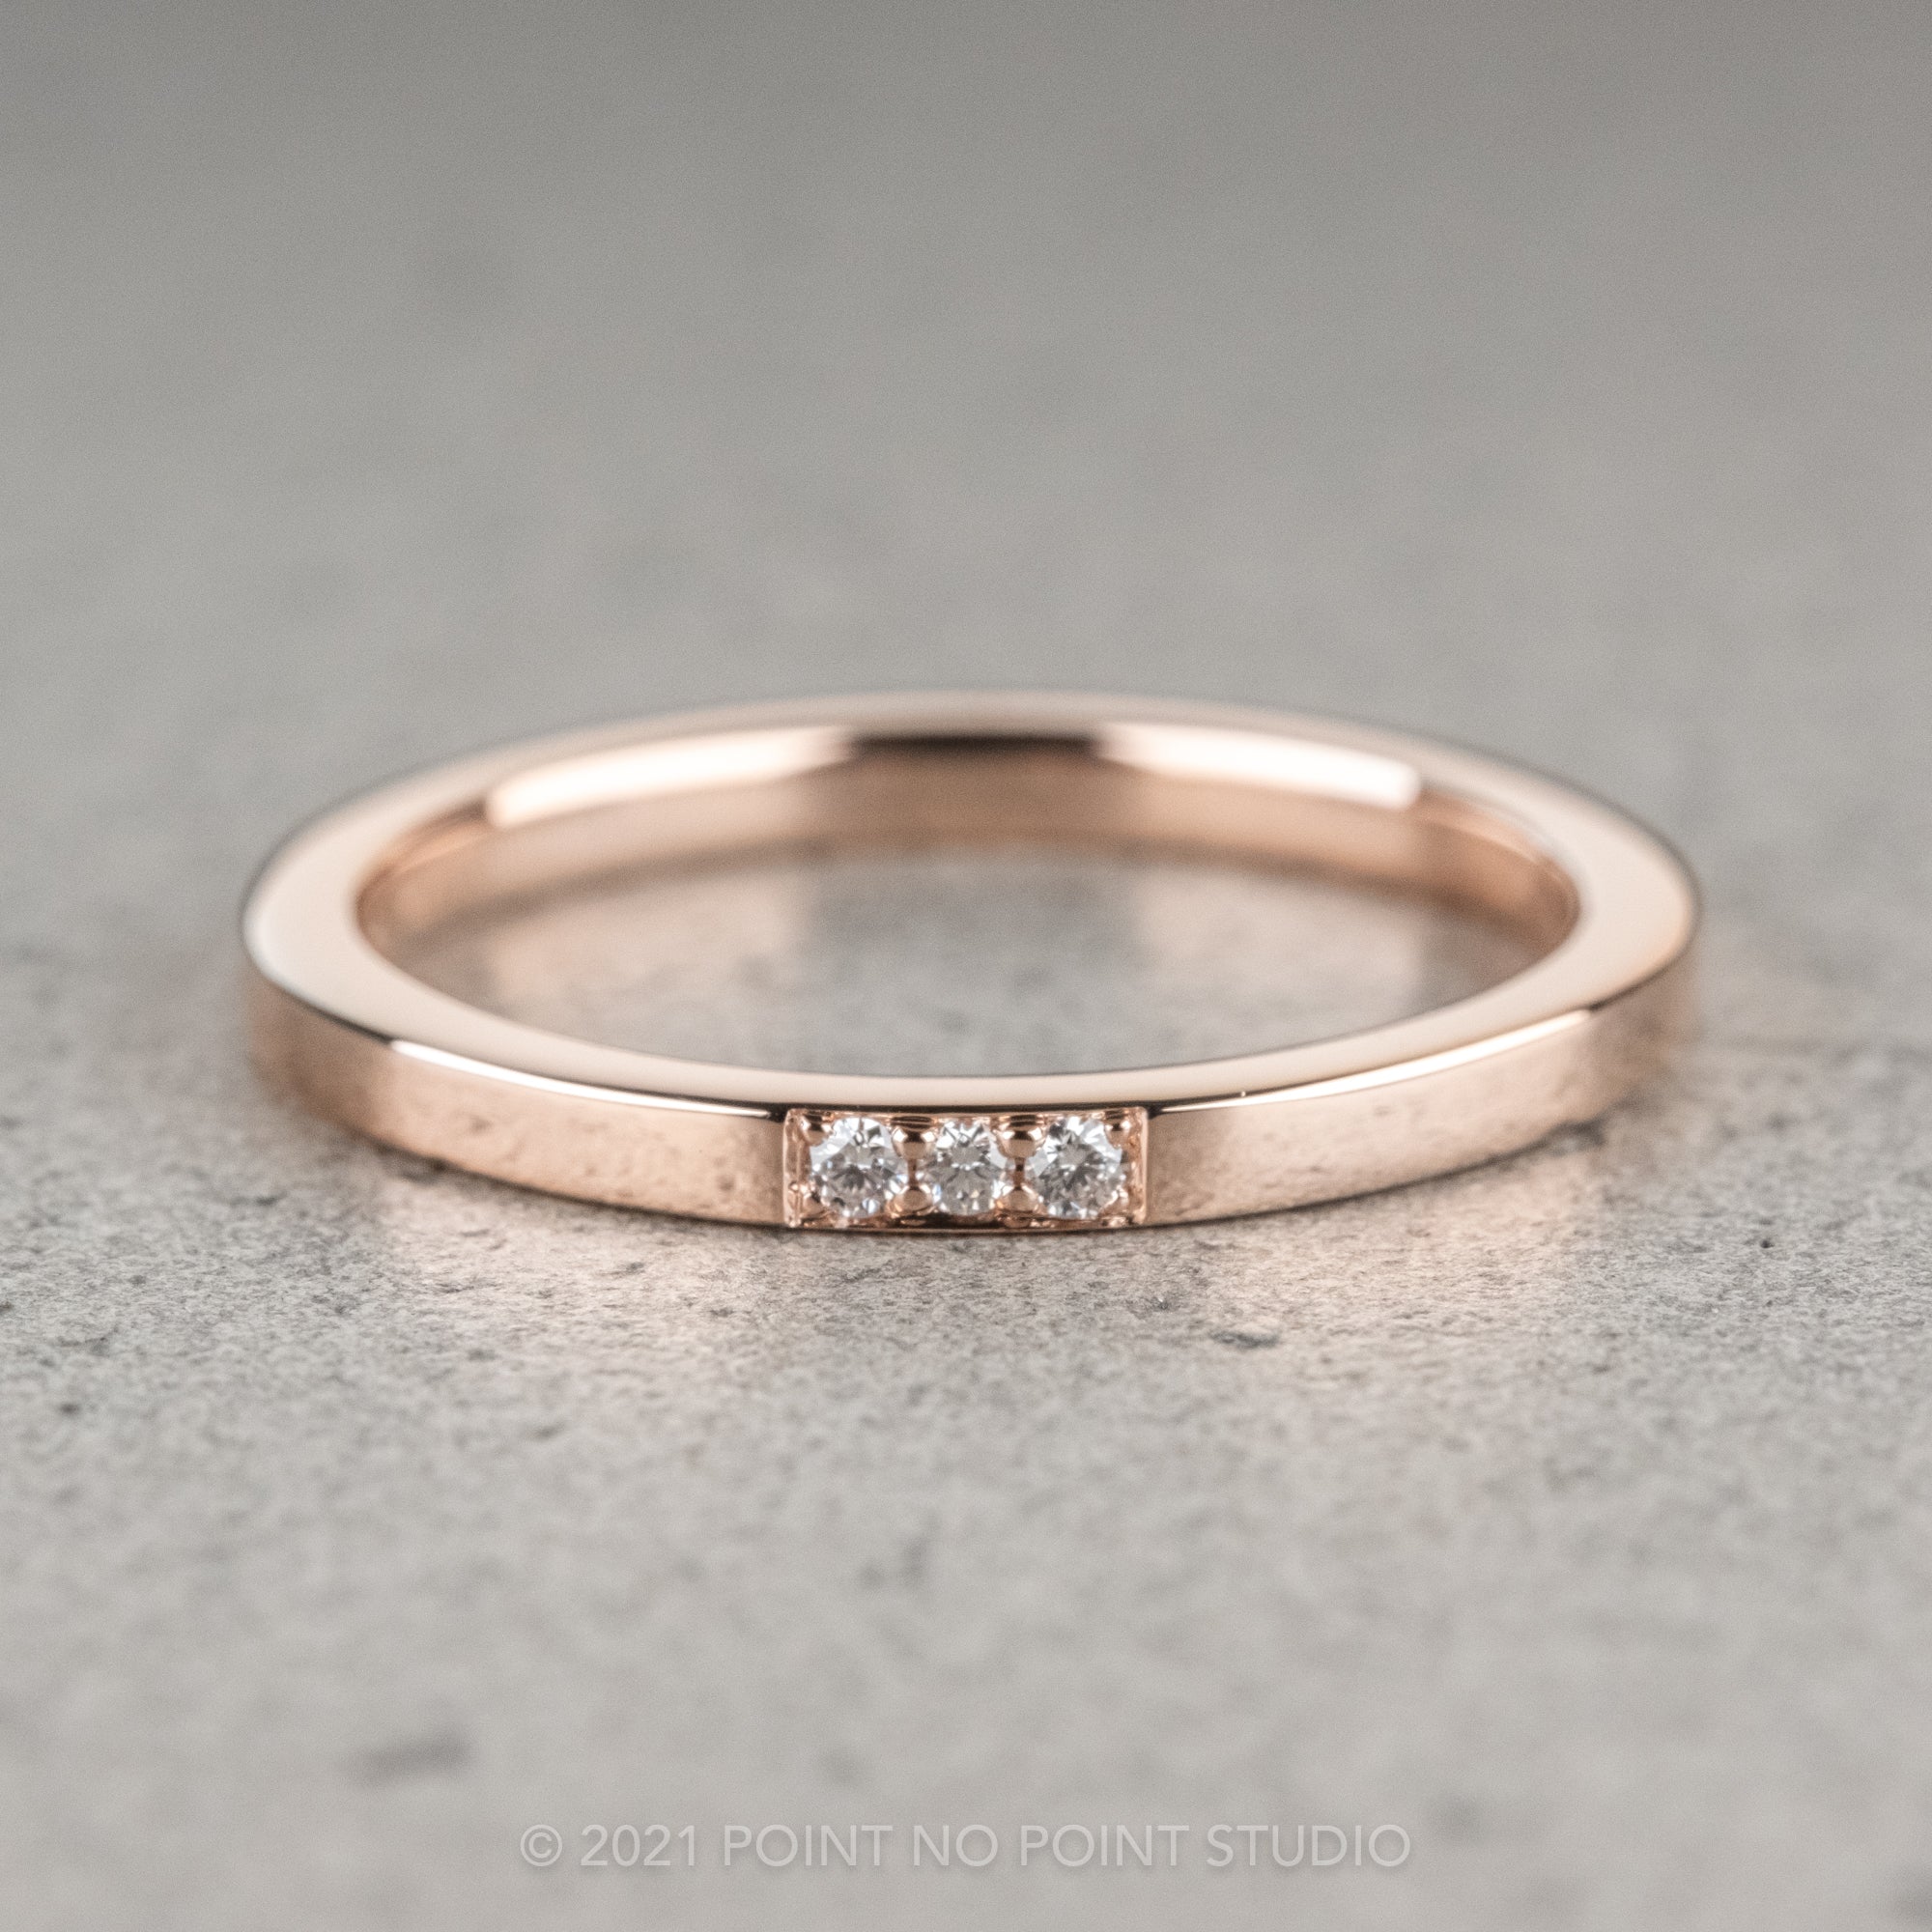 Composure Ring | Handcrafted 14k Gold & Diamond Ring – Melanie Casey